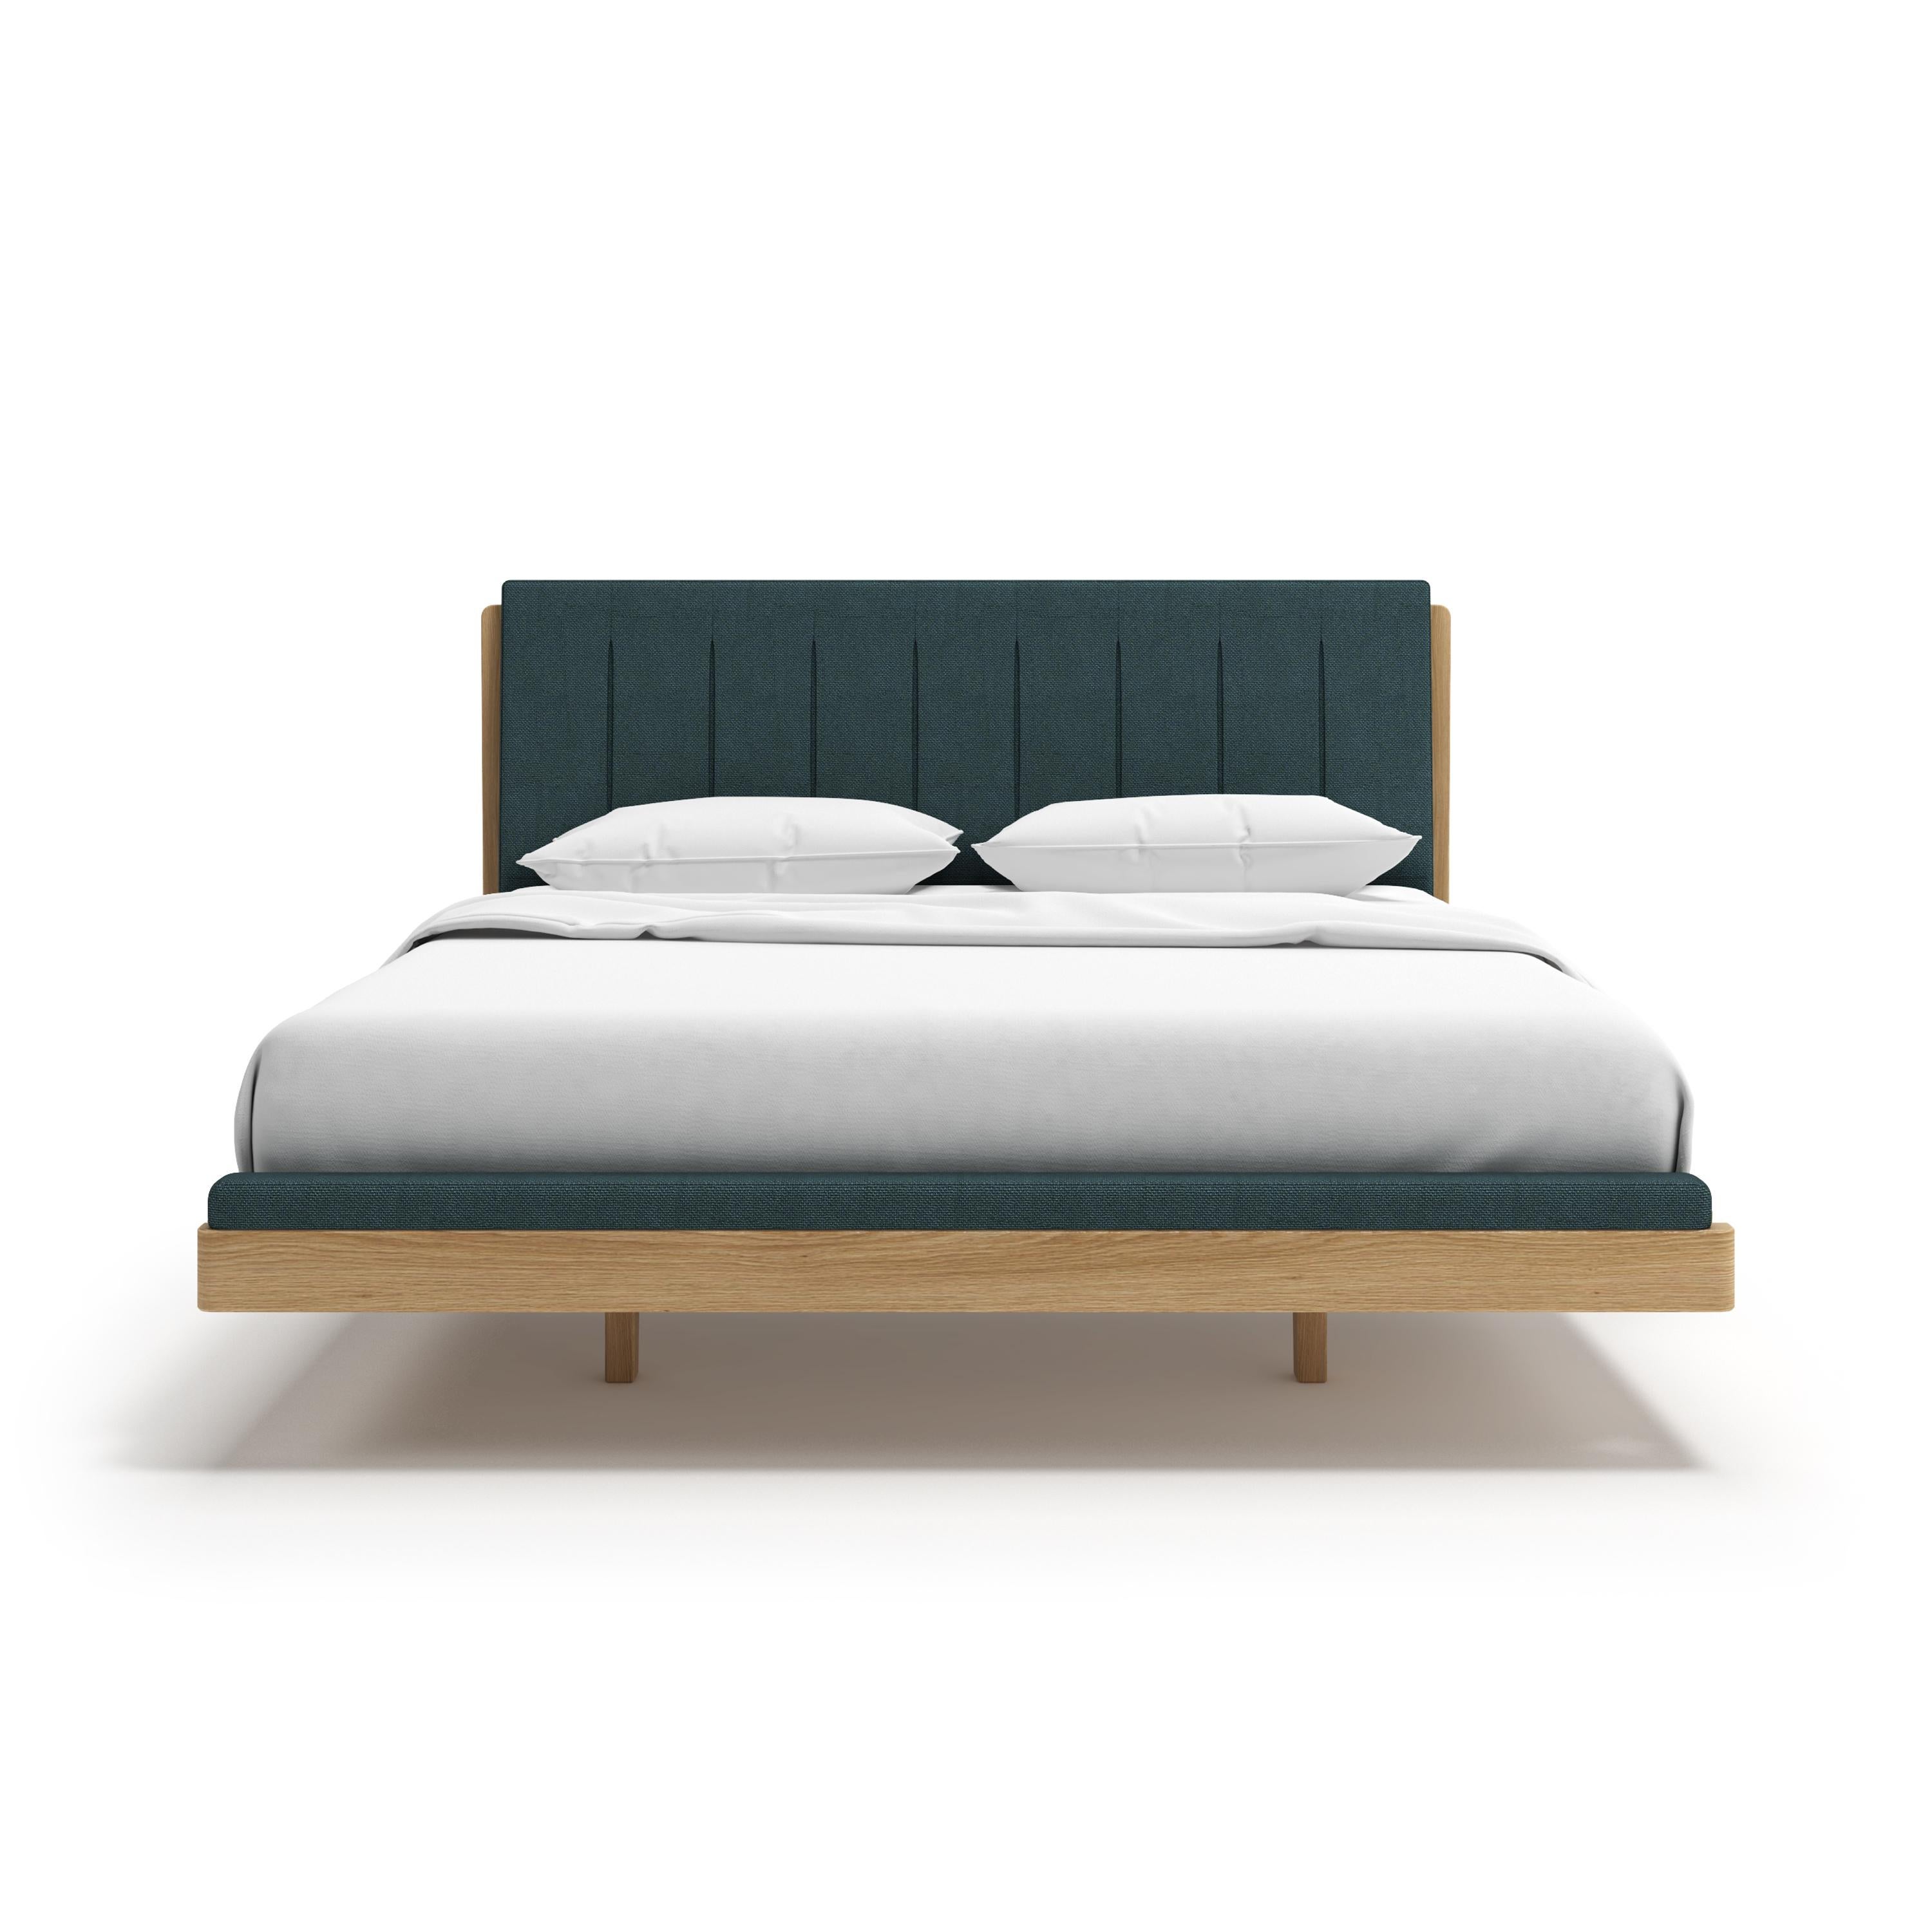 Experience superior comfort and craftsmanship with the Talvi Bed! Made from solid oak or teak wood, this beautiful bed will bring a sense of beauty to your room. Enjoy an extraordinary sleep and stylish design.

All Tektōn pieces are made of natural